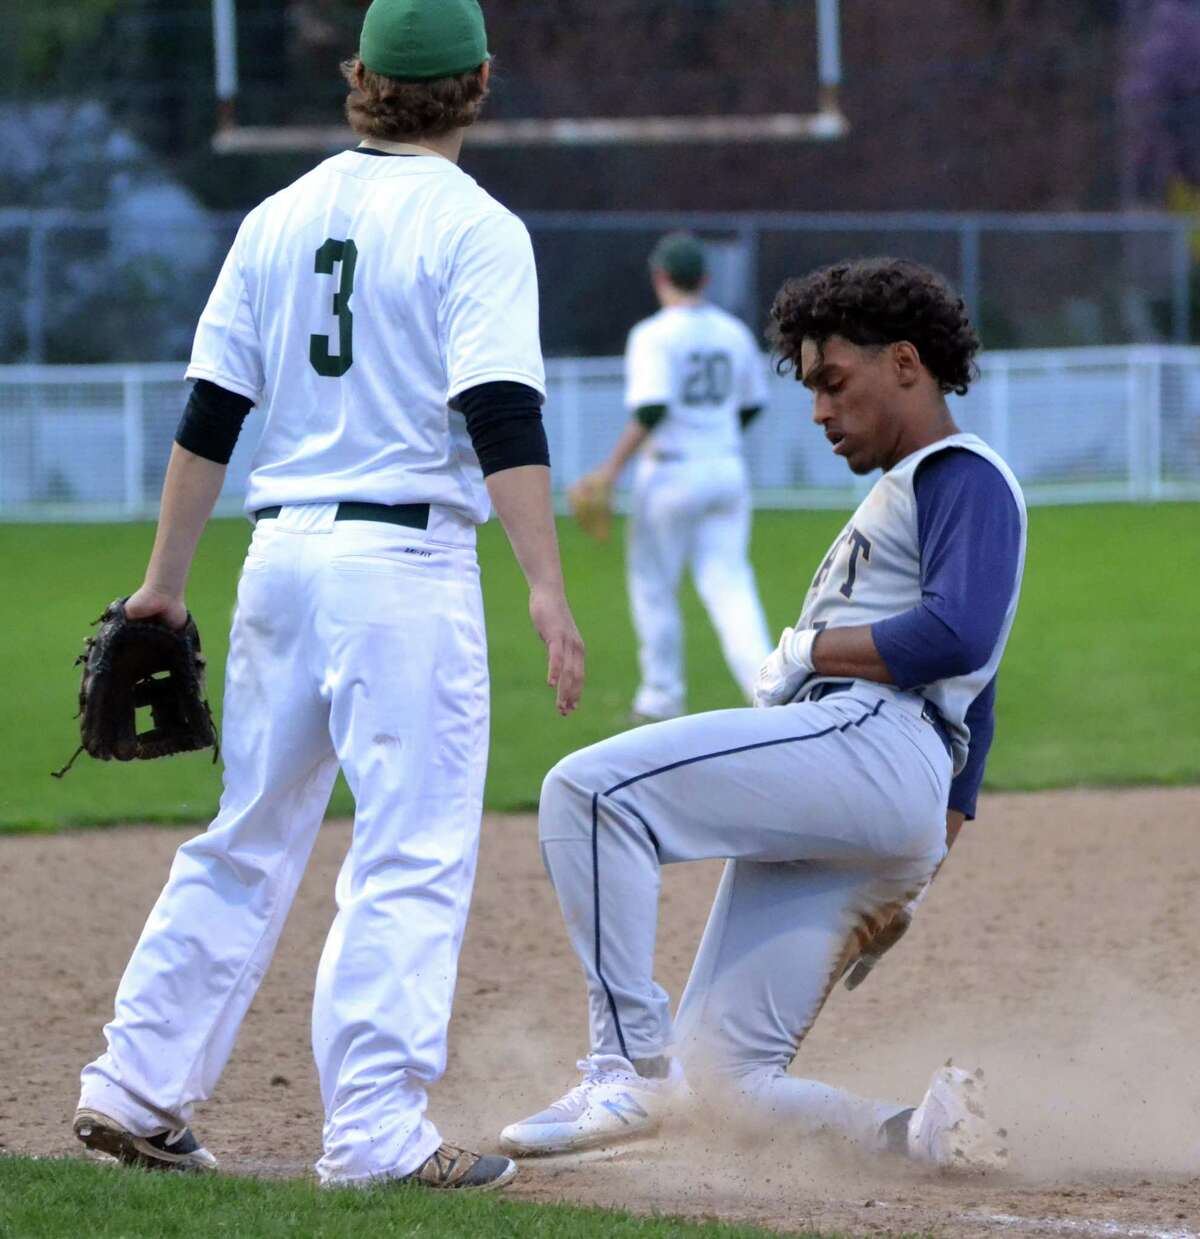 Platt’s EJ Dudley slides into third base for a triple against Maloney on Wednesday, May 2, 2018. (Pete Paguaga, Hearst Media Company)